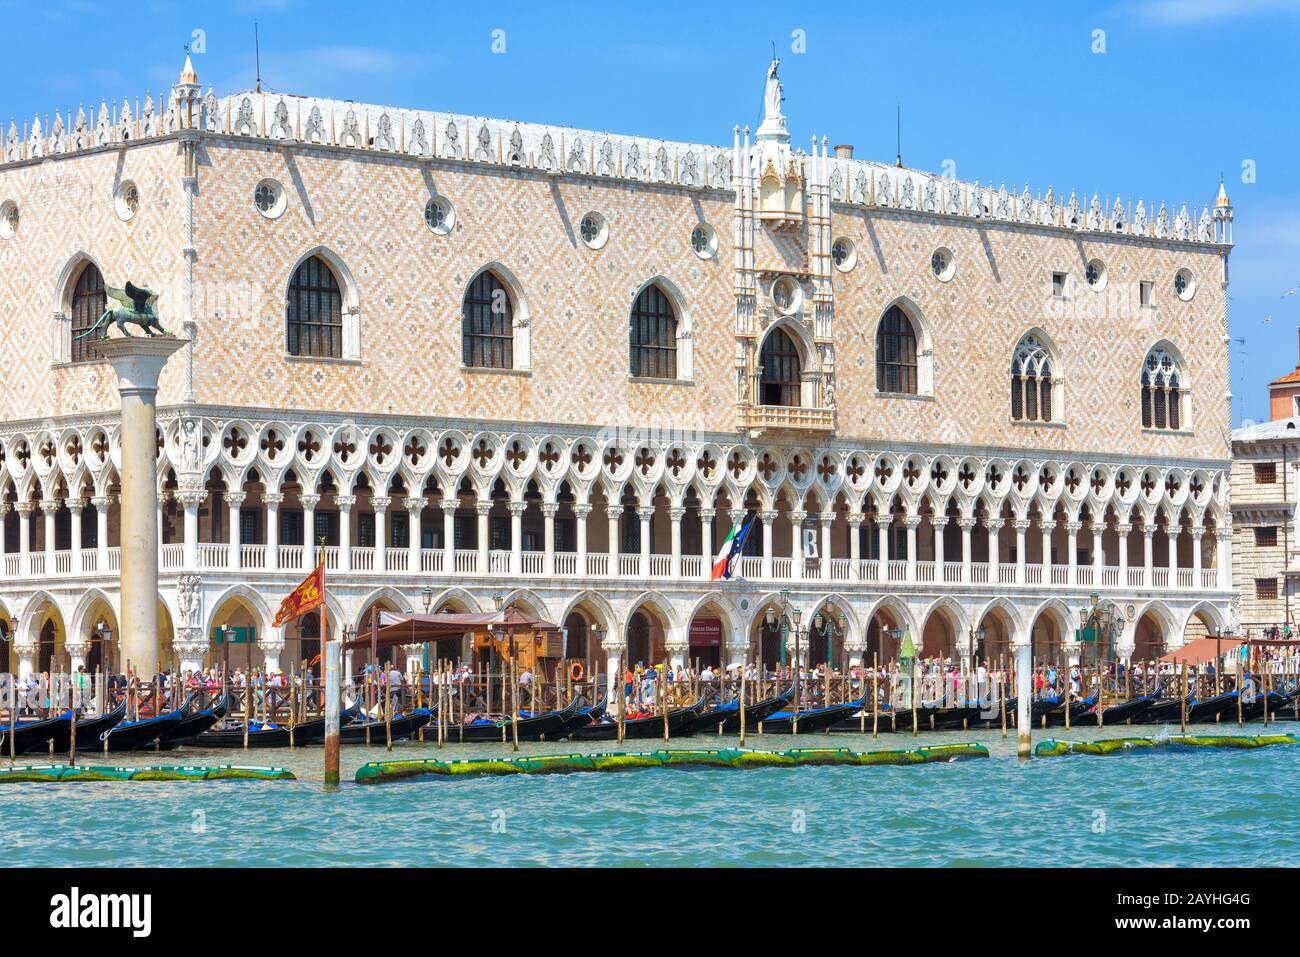 Venice, Italy – May 18, 2017: Doge's Palace or Palazzo Ducale in Venice. It is one of the top landmarks of Venice. Beautiful view of Doge's Palace fro Stock Photo